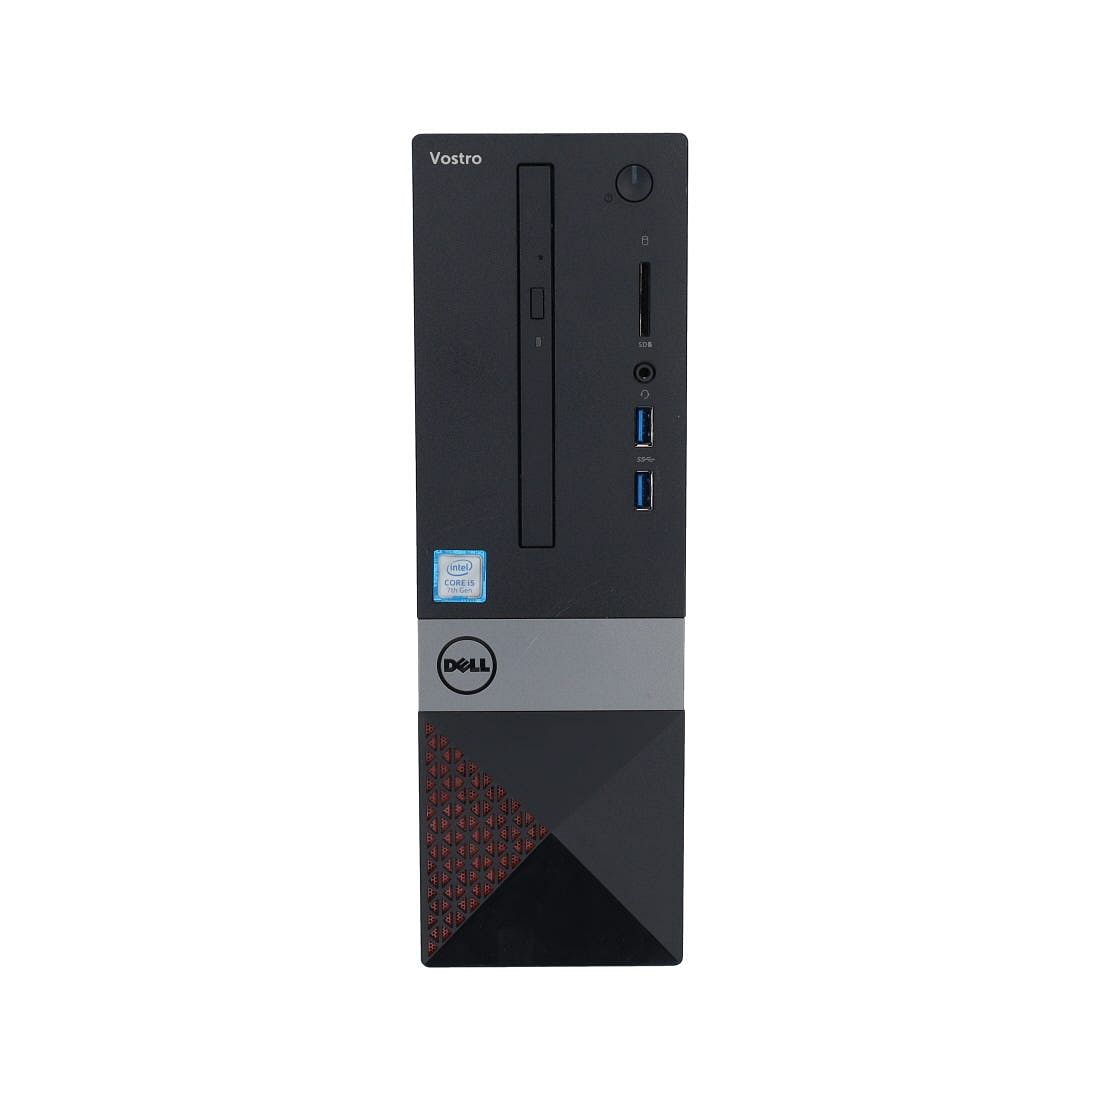 Dell Vostro Desktop 3268 C I5-7400 - 3.00 GHZ  - 4GB RAM - 500 GB HDD - Black  With Wired Keyboard & Mouse